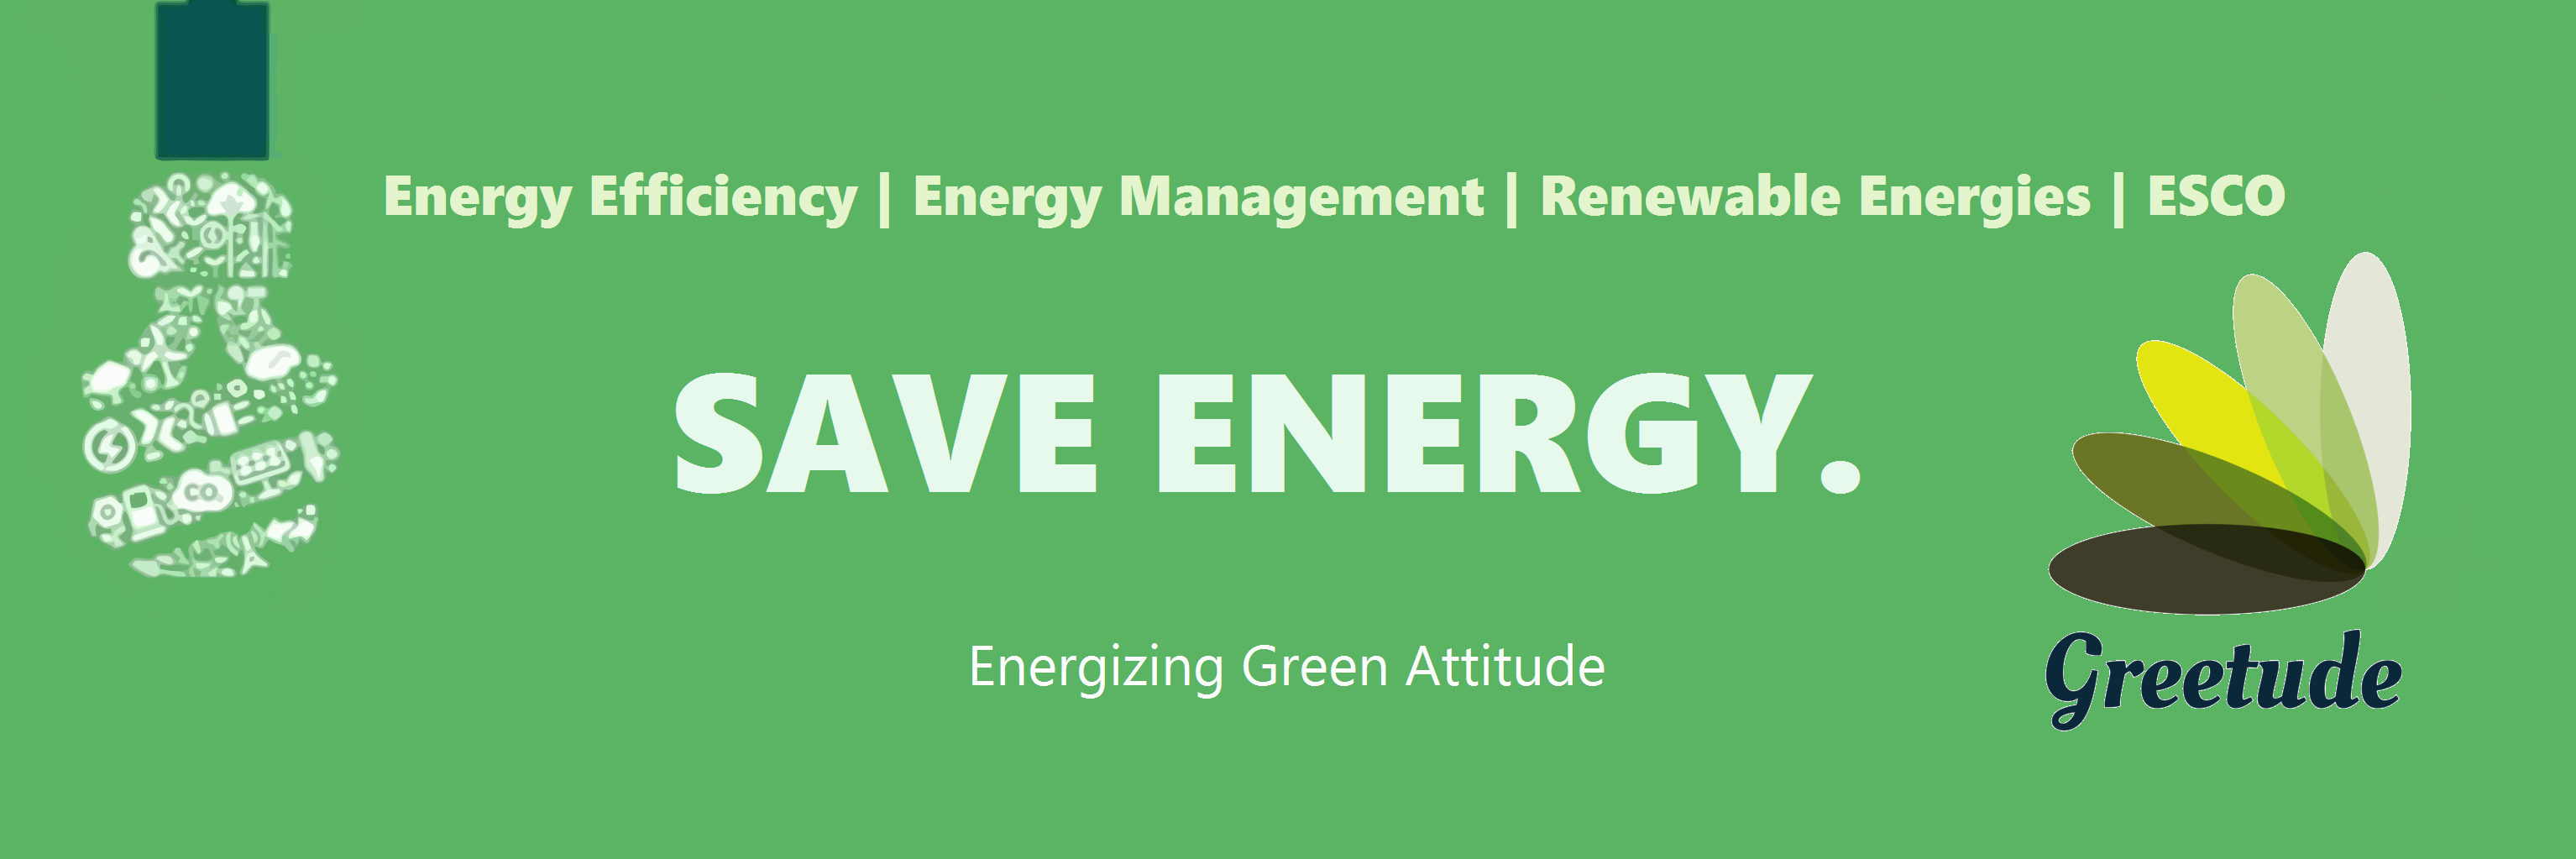 Greetude Energy Pvt Ltd cover picture